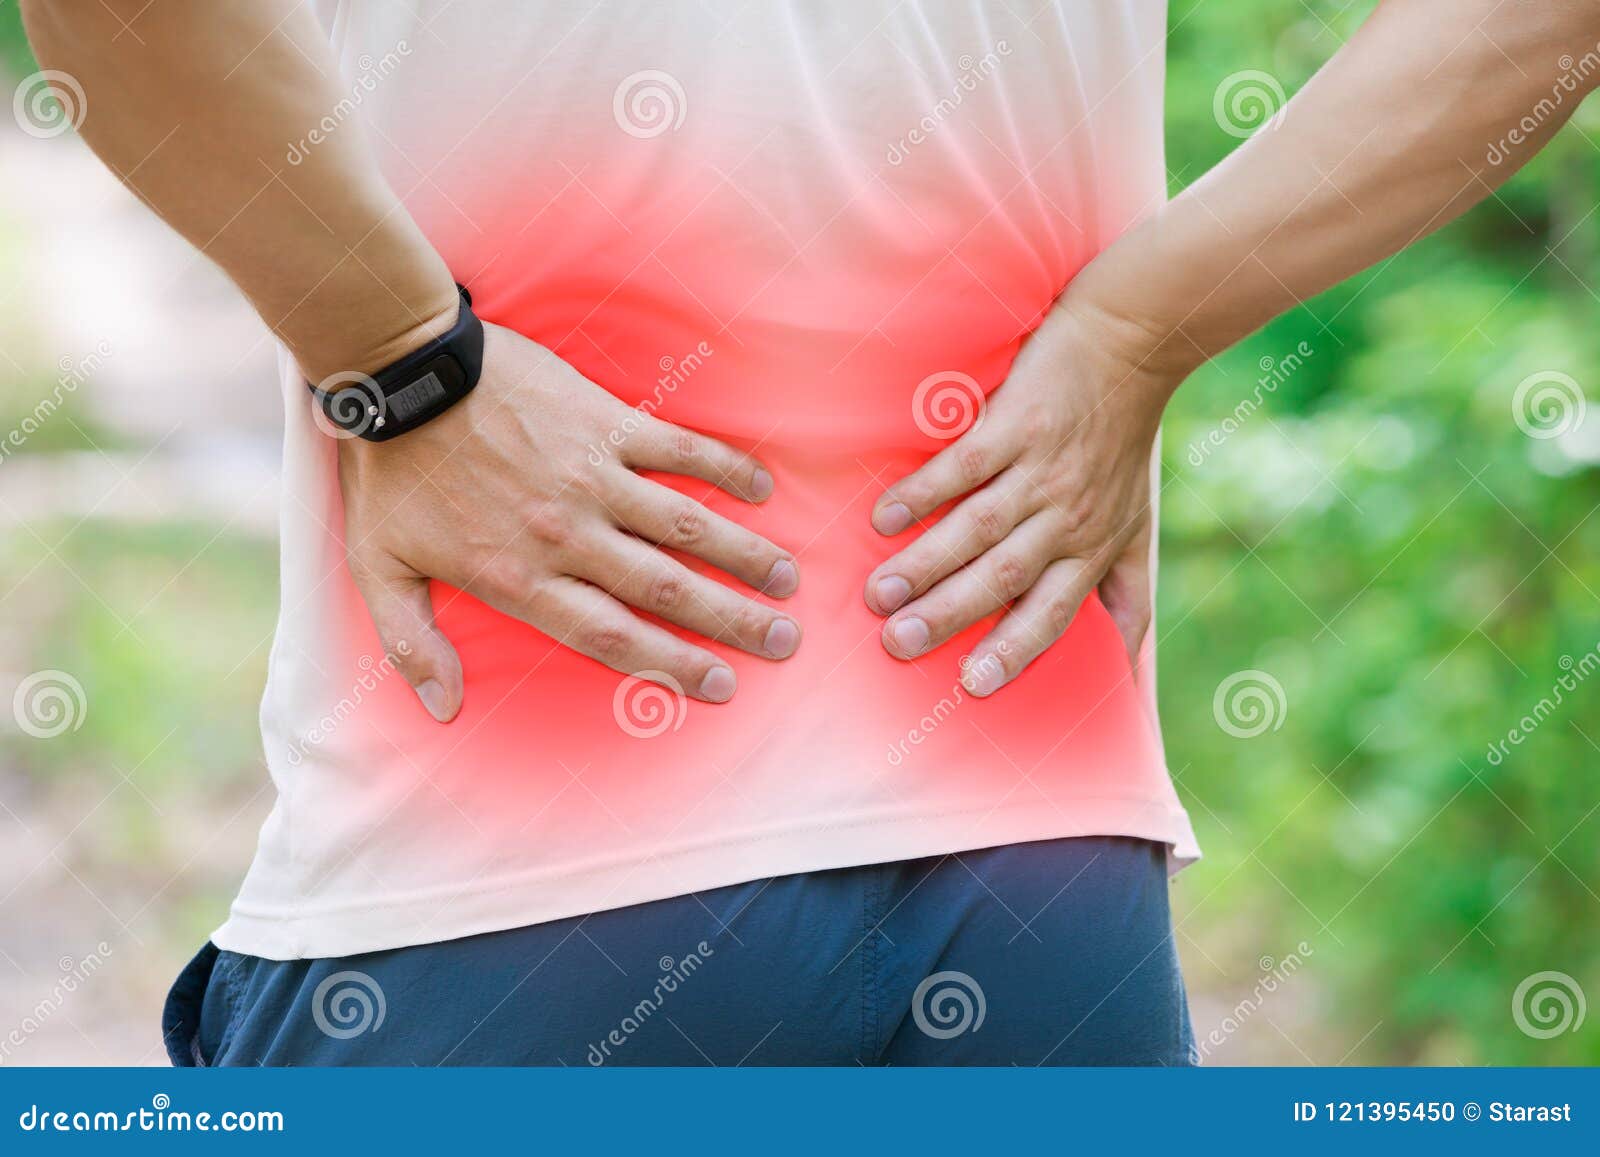 man with back pain, kidney inflammation, trauma during workout